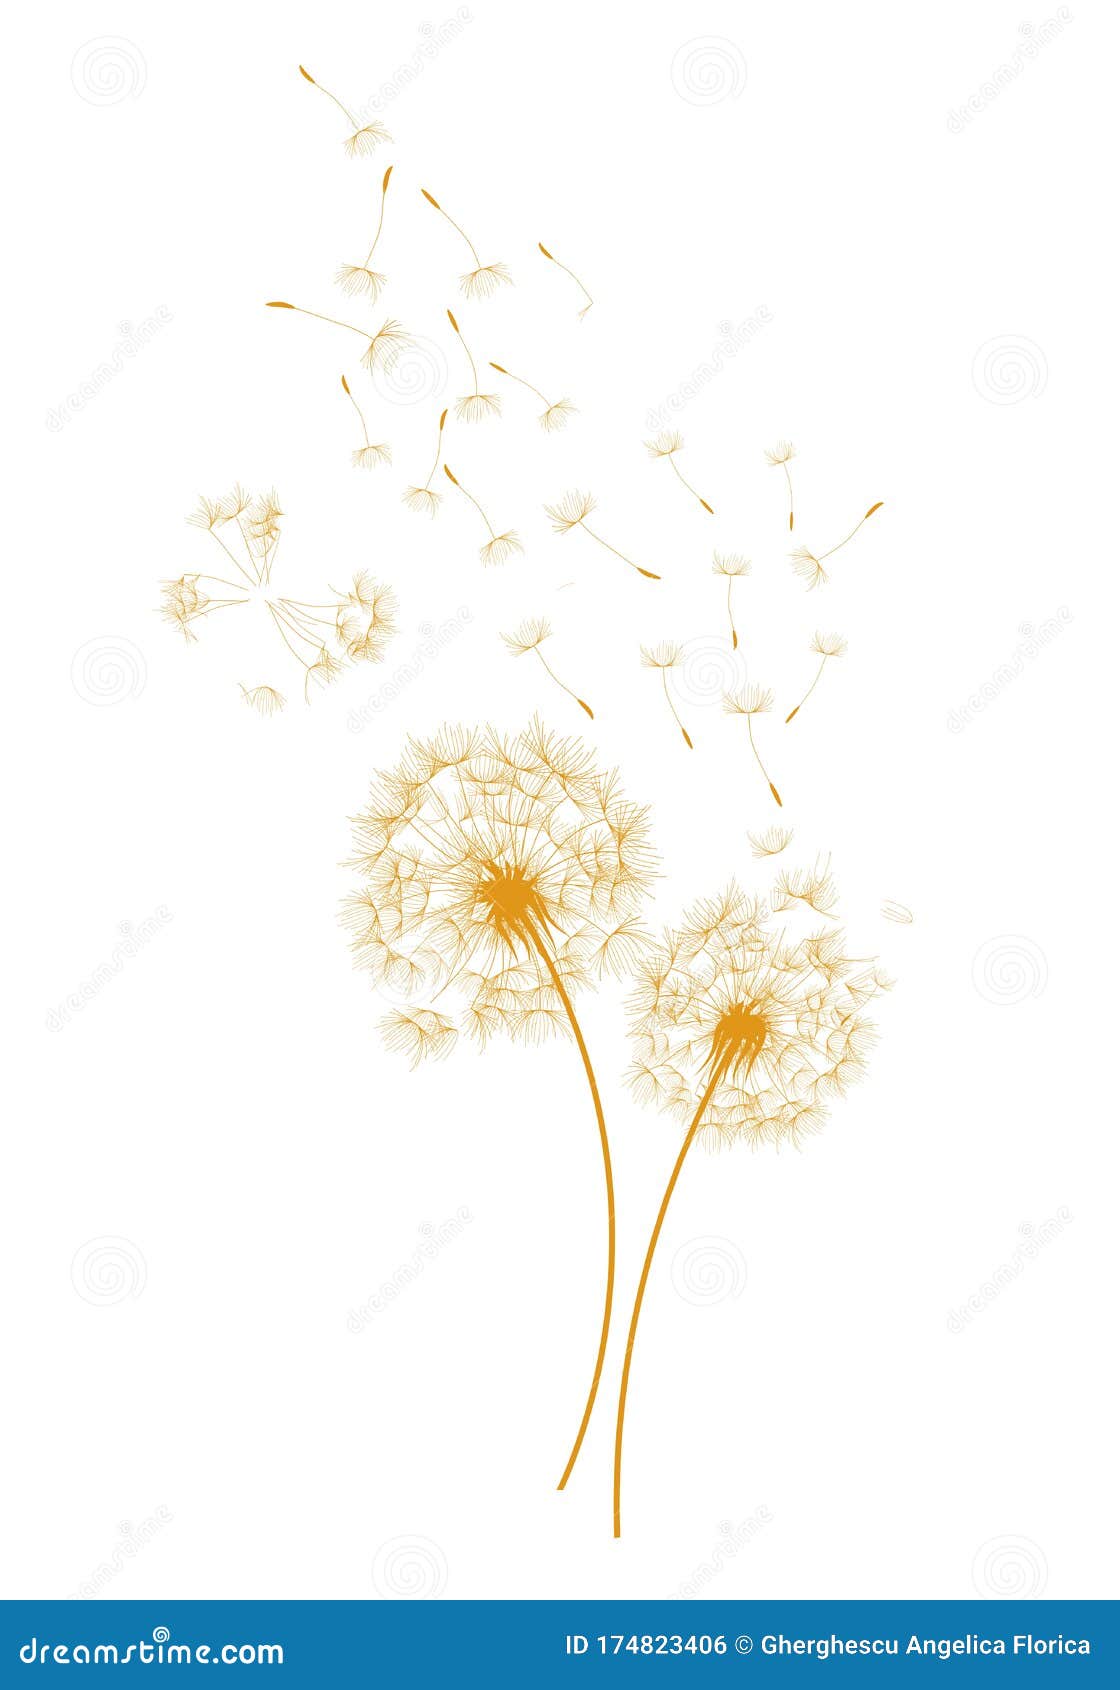 dandelions and wind - 